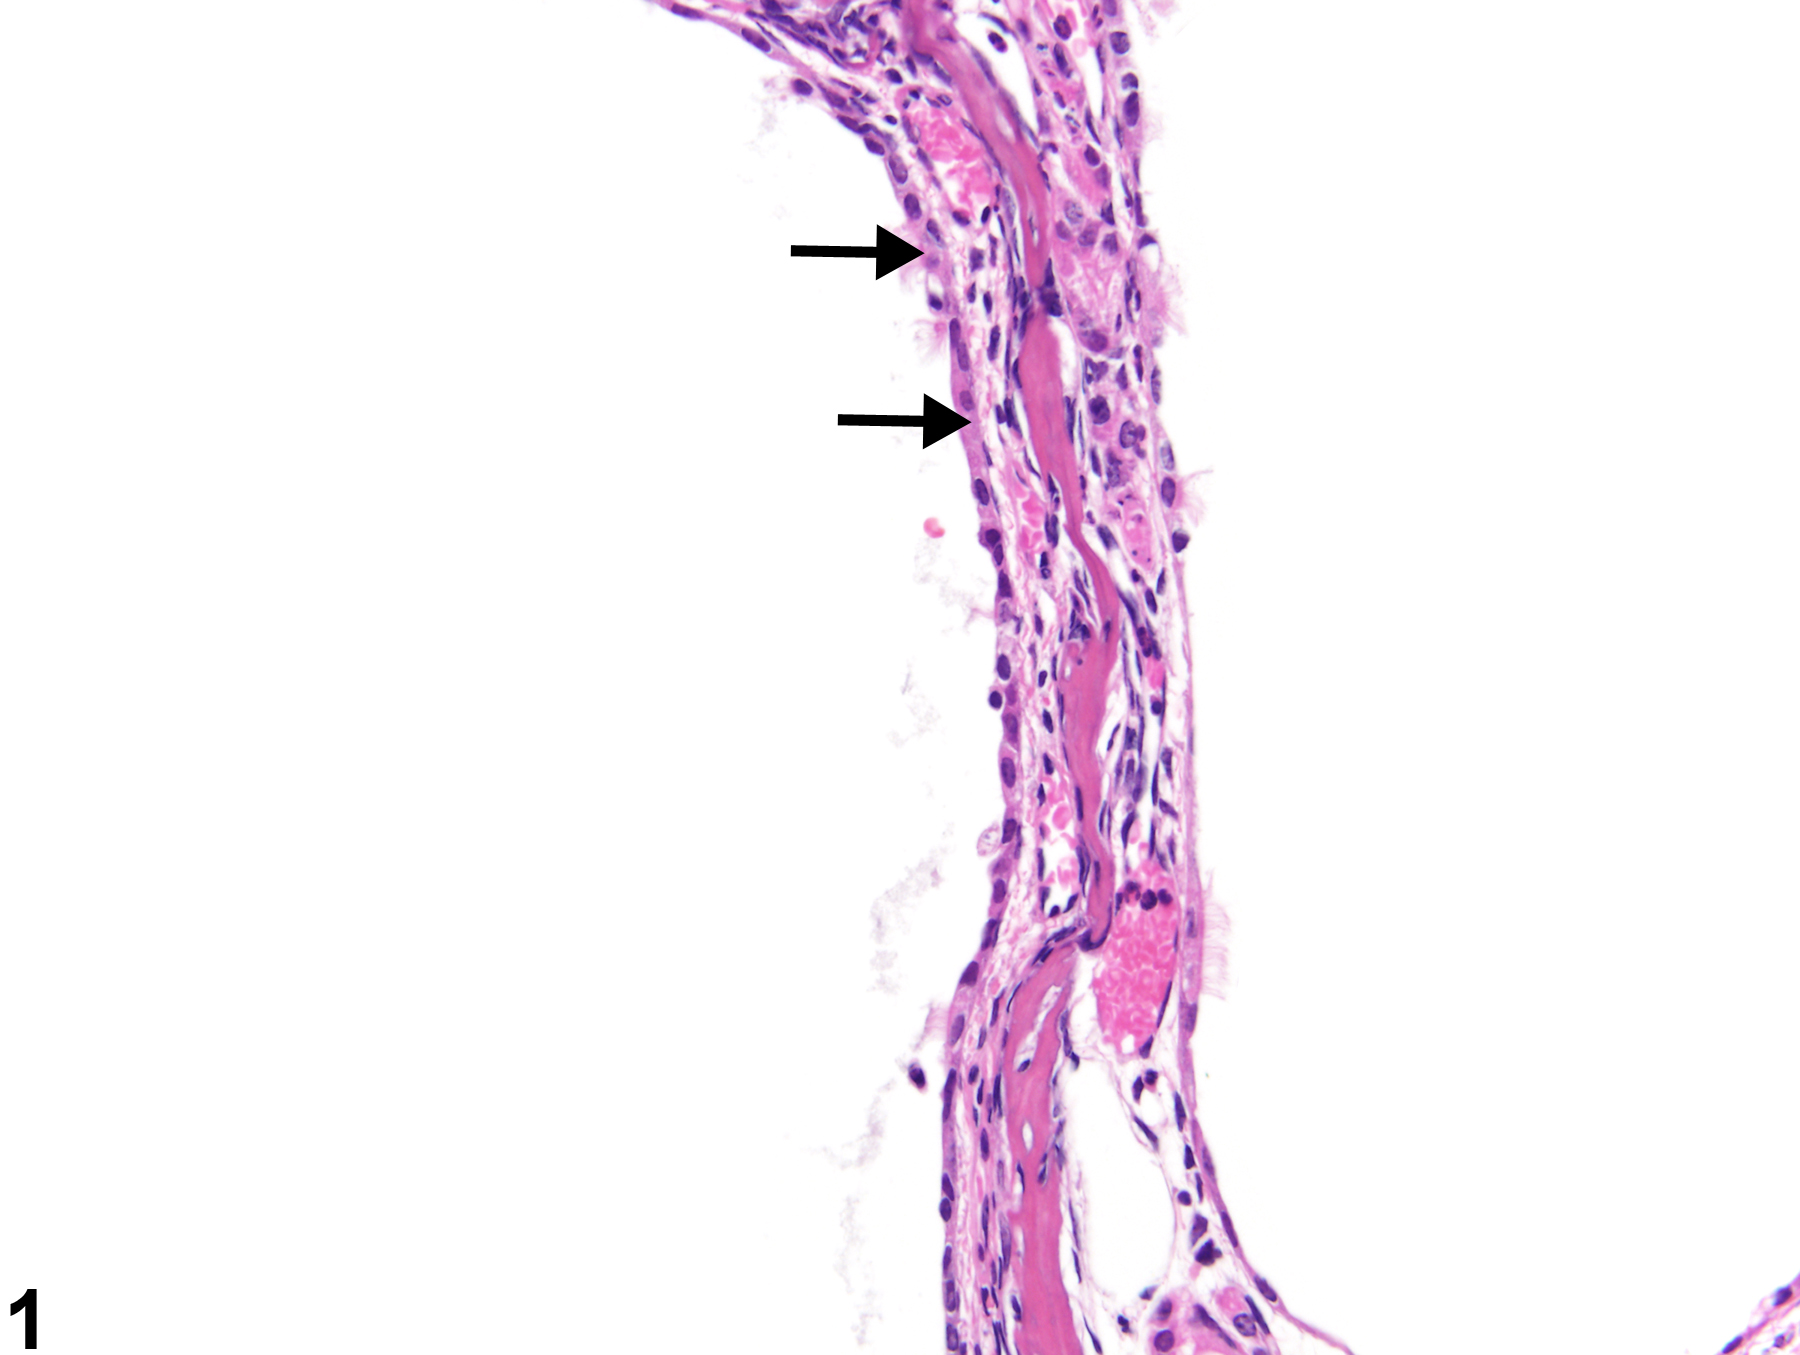 Image of regeneration in the nose, respiratory epithelium from a female B6C3F1/N mouse in a chronic study